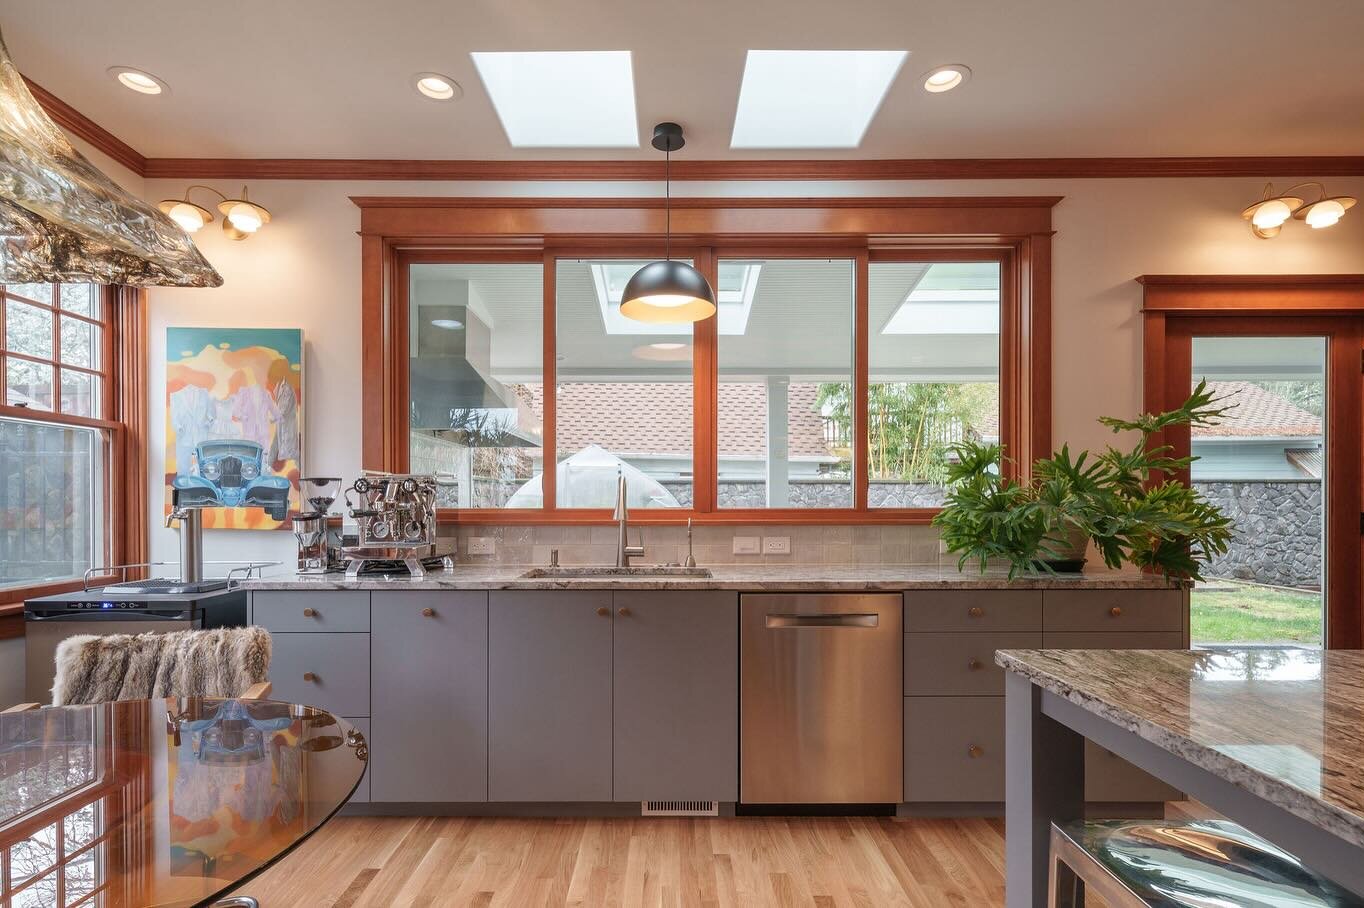 Let&rsquo;s take a look inside our Mt. Tabor project. Our clients wanted a more functional kitchen with more natural light, counterspace and an improved connection to the outdoor patio. We were able to reuse the perimeter cabinetry while incorporatin